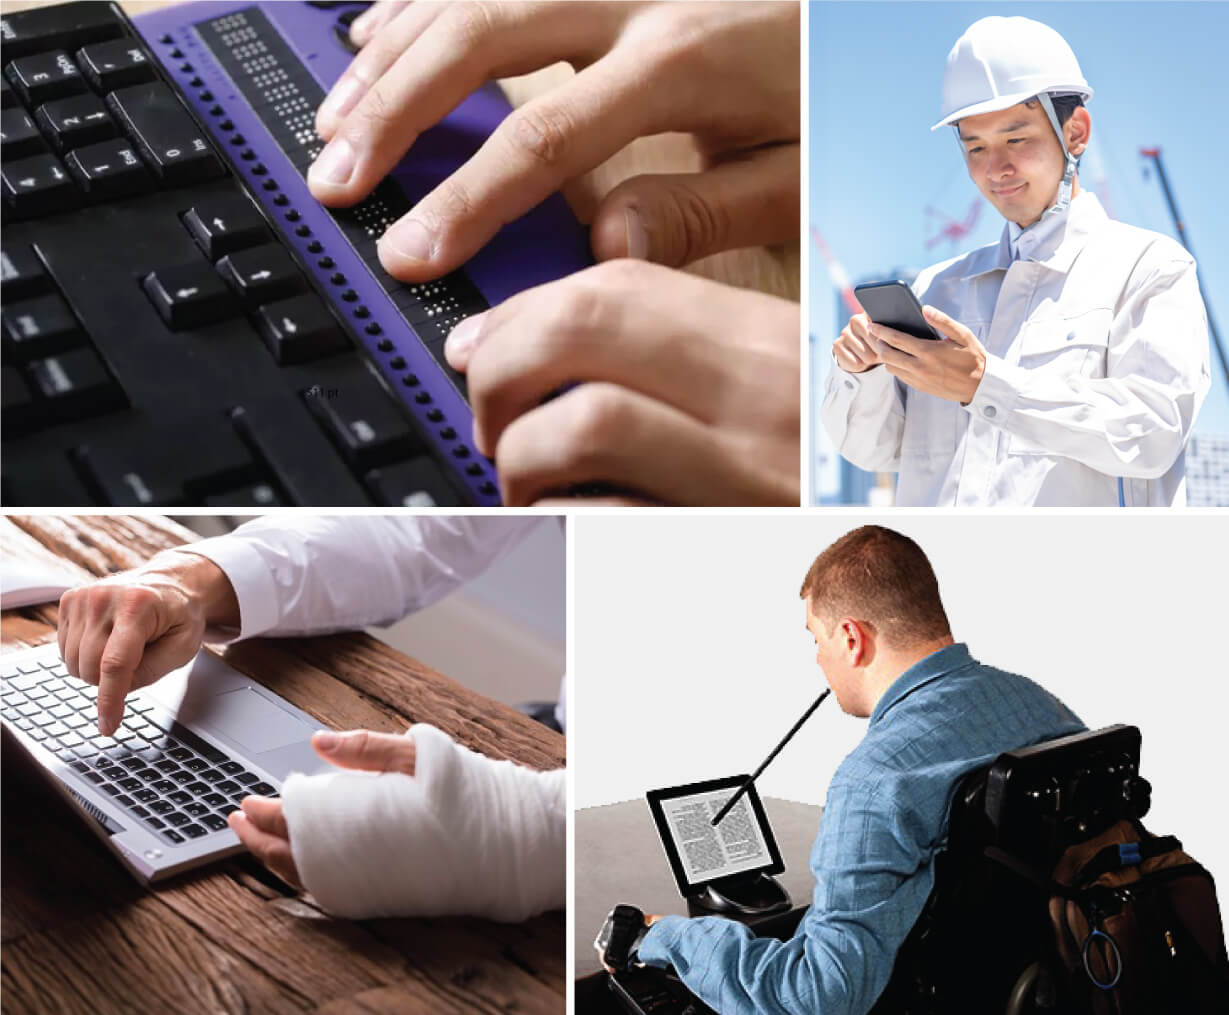 braille keyboard user, engineer using a smart phone in bright sunlight, user with broken left hand using keyboard with right index finger, user interacting with a device by a mouth stylus